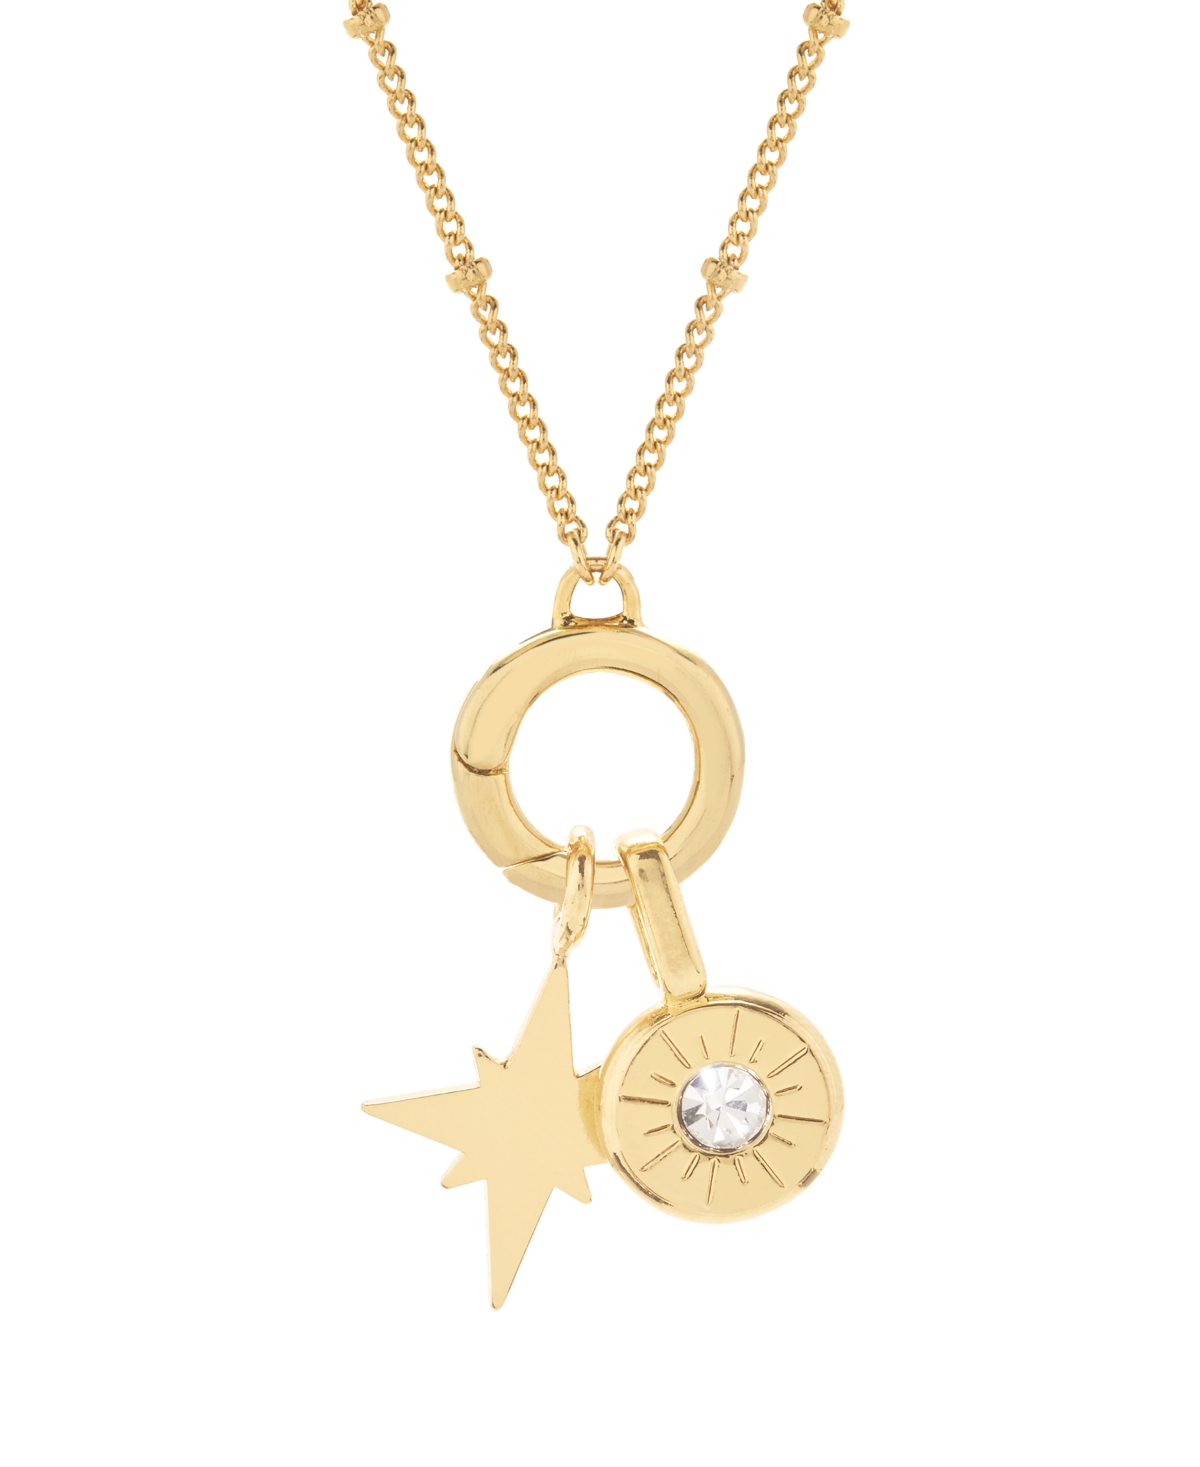 Brook & York Crystal 14k Gold-plated Emily Charm And Necklace Set